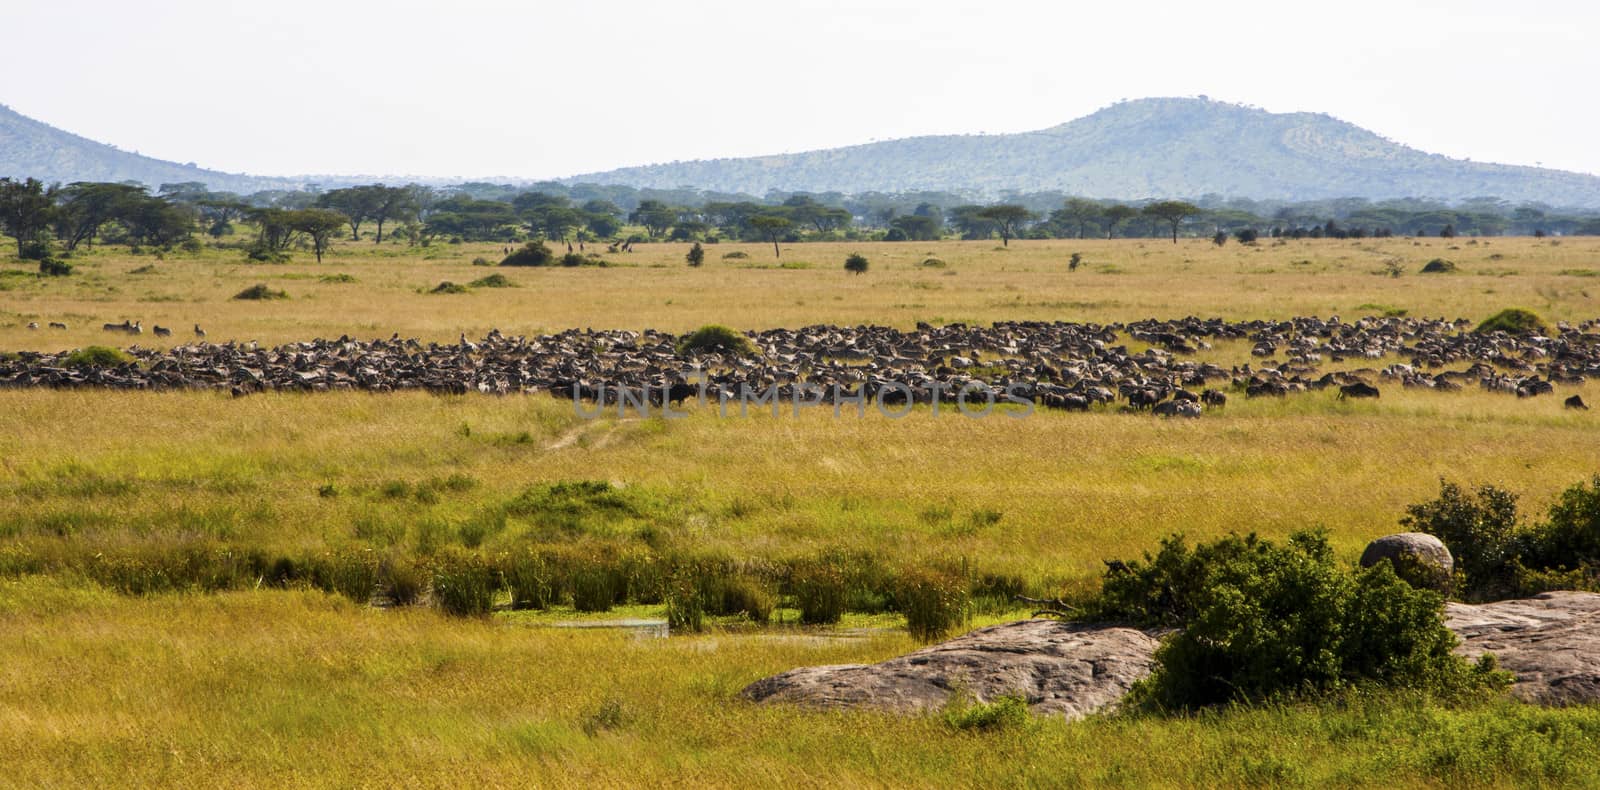 Typical African landscape at Serengeti National park